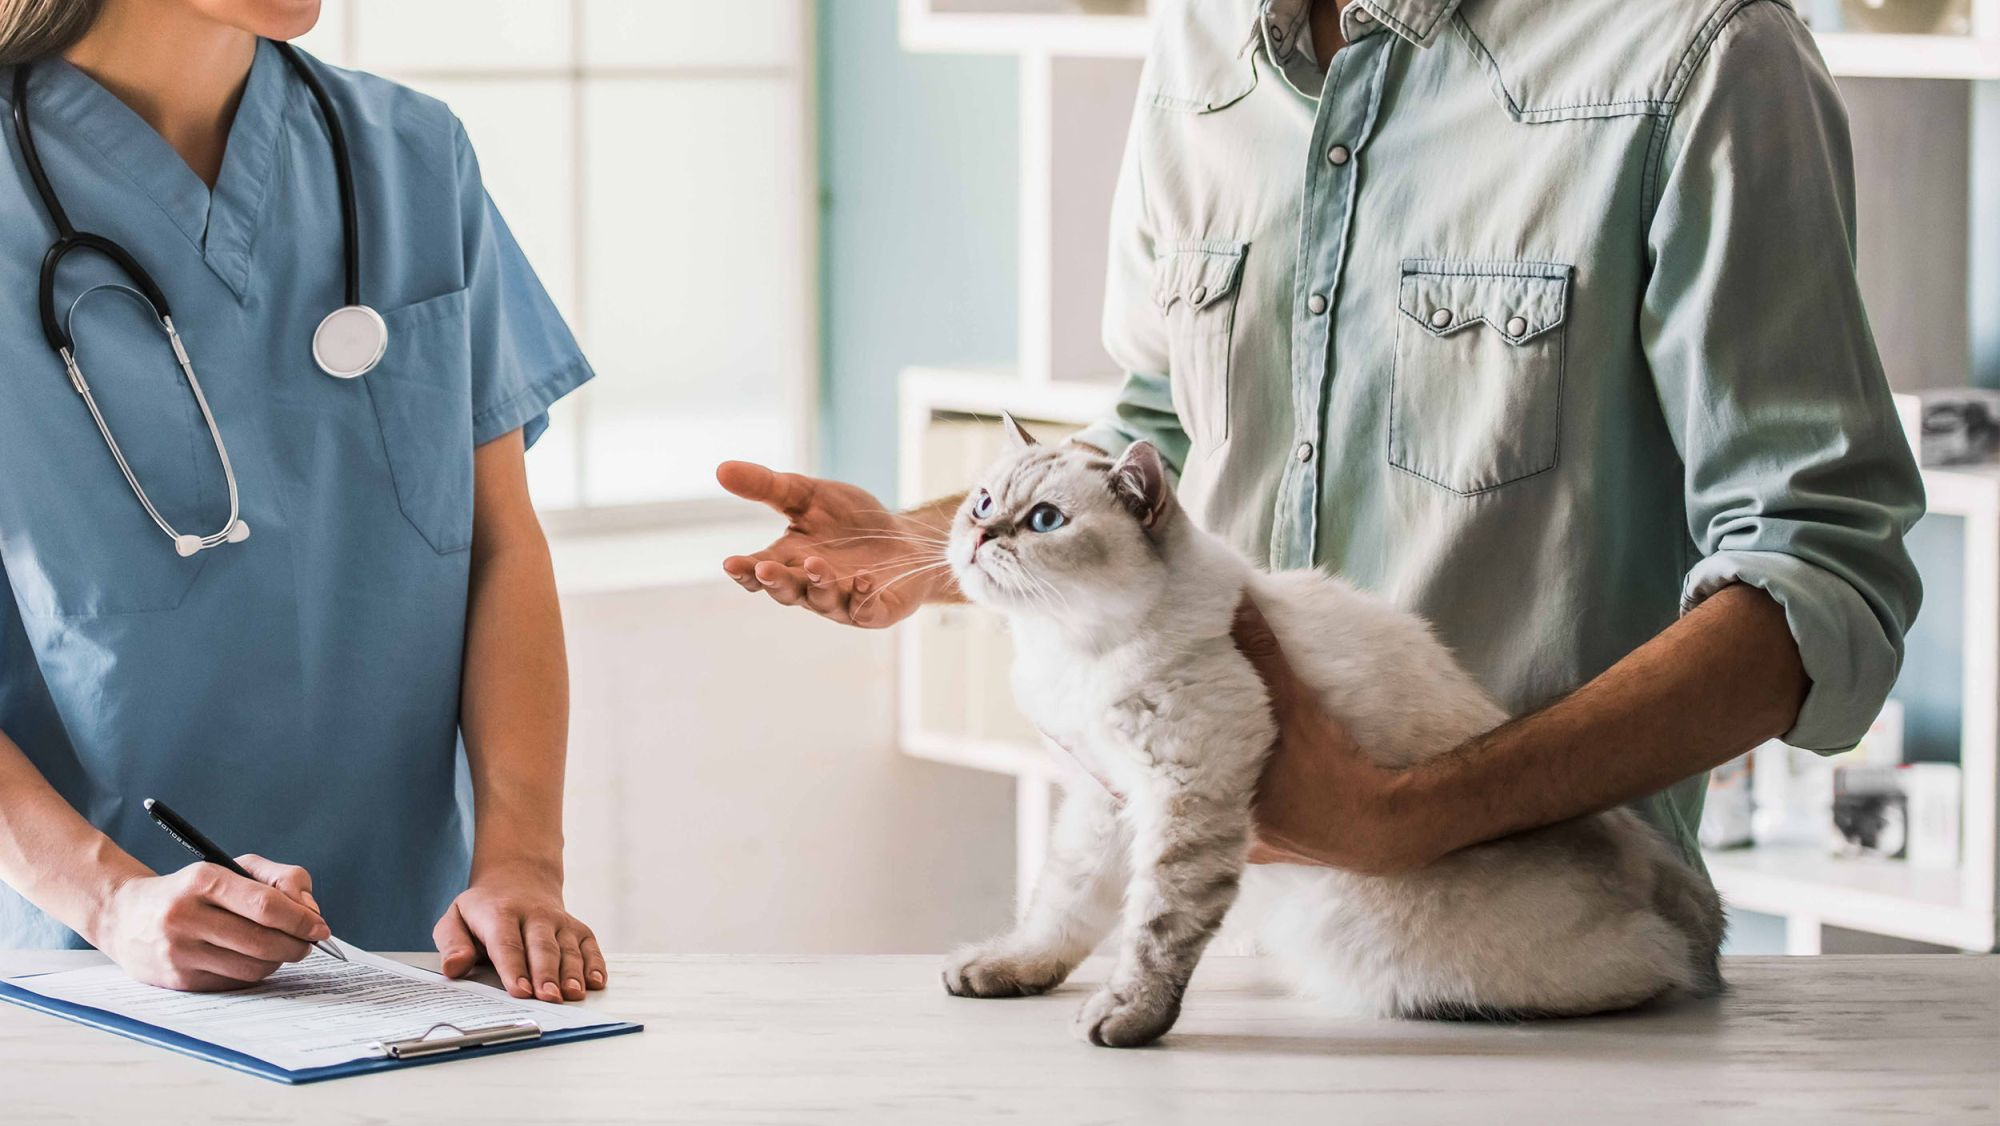 Adult British Shorthair sitting on an examination table while owner speaks with the vet